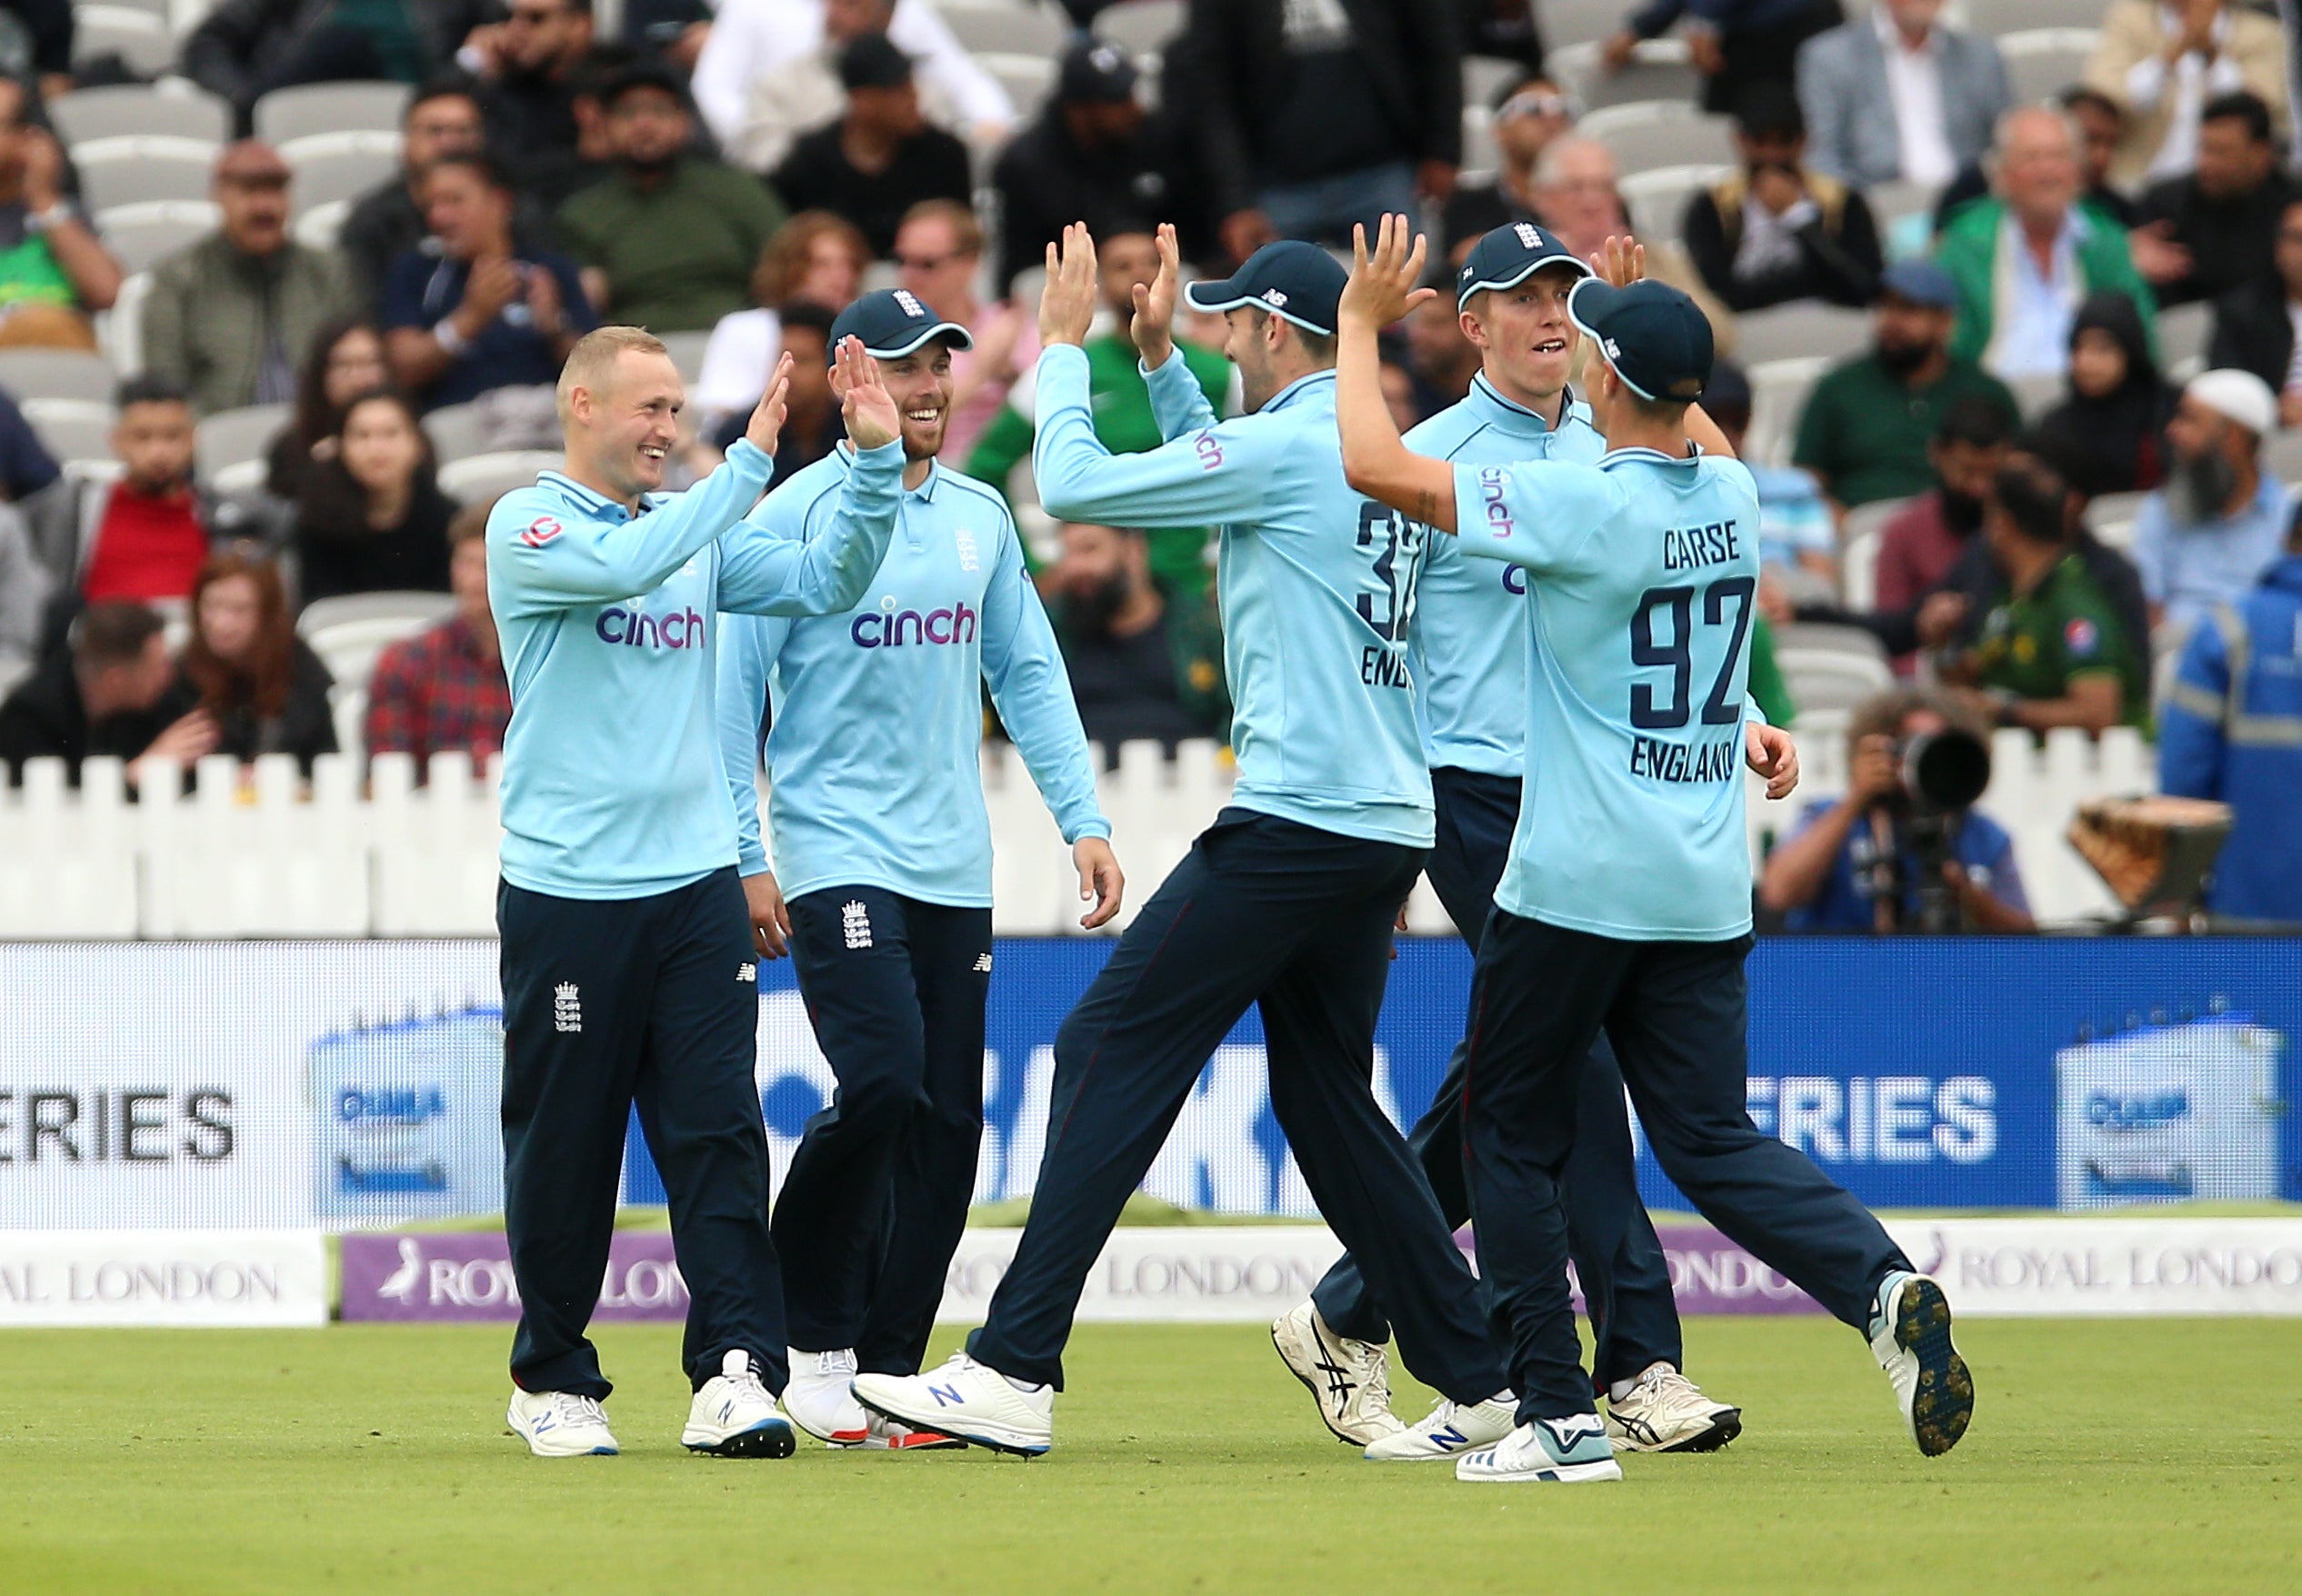 England claimed victory over Pakistan at Lord's